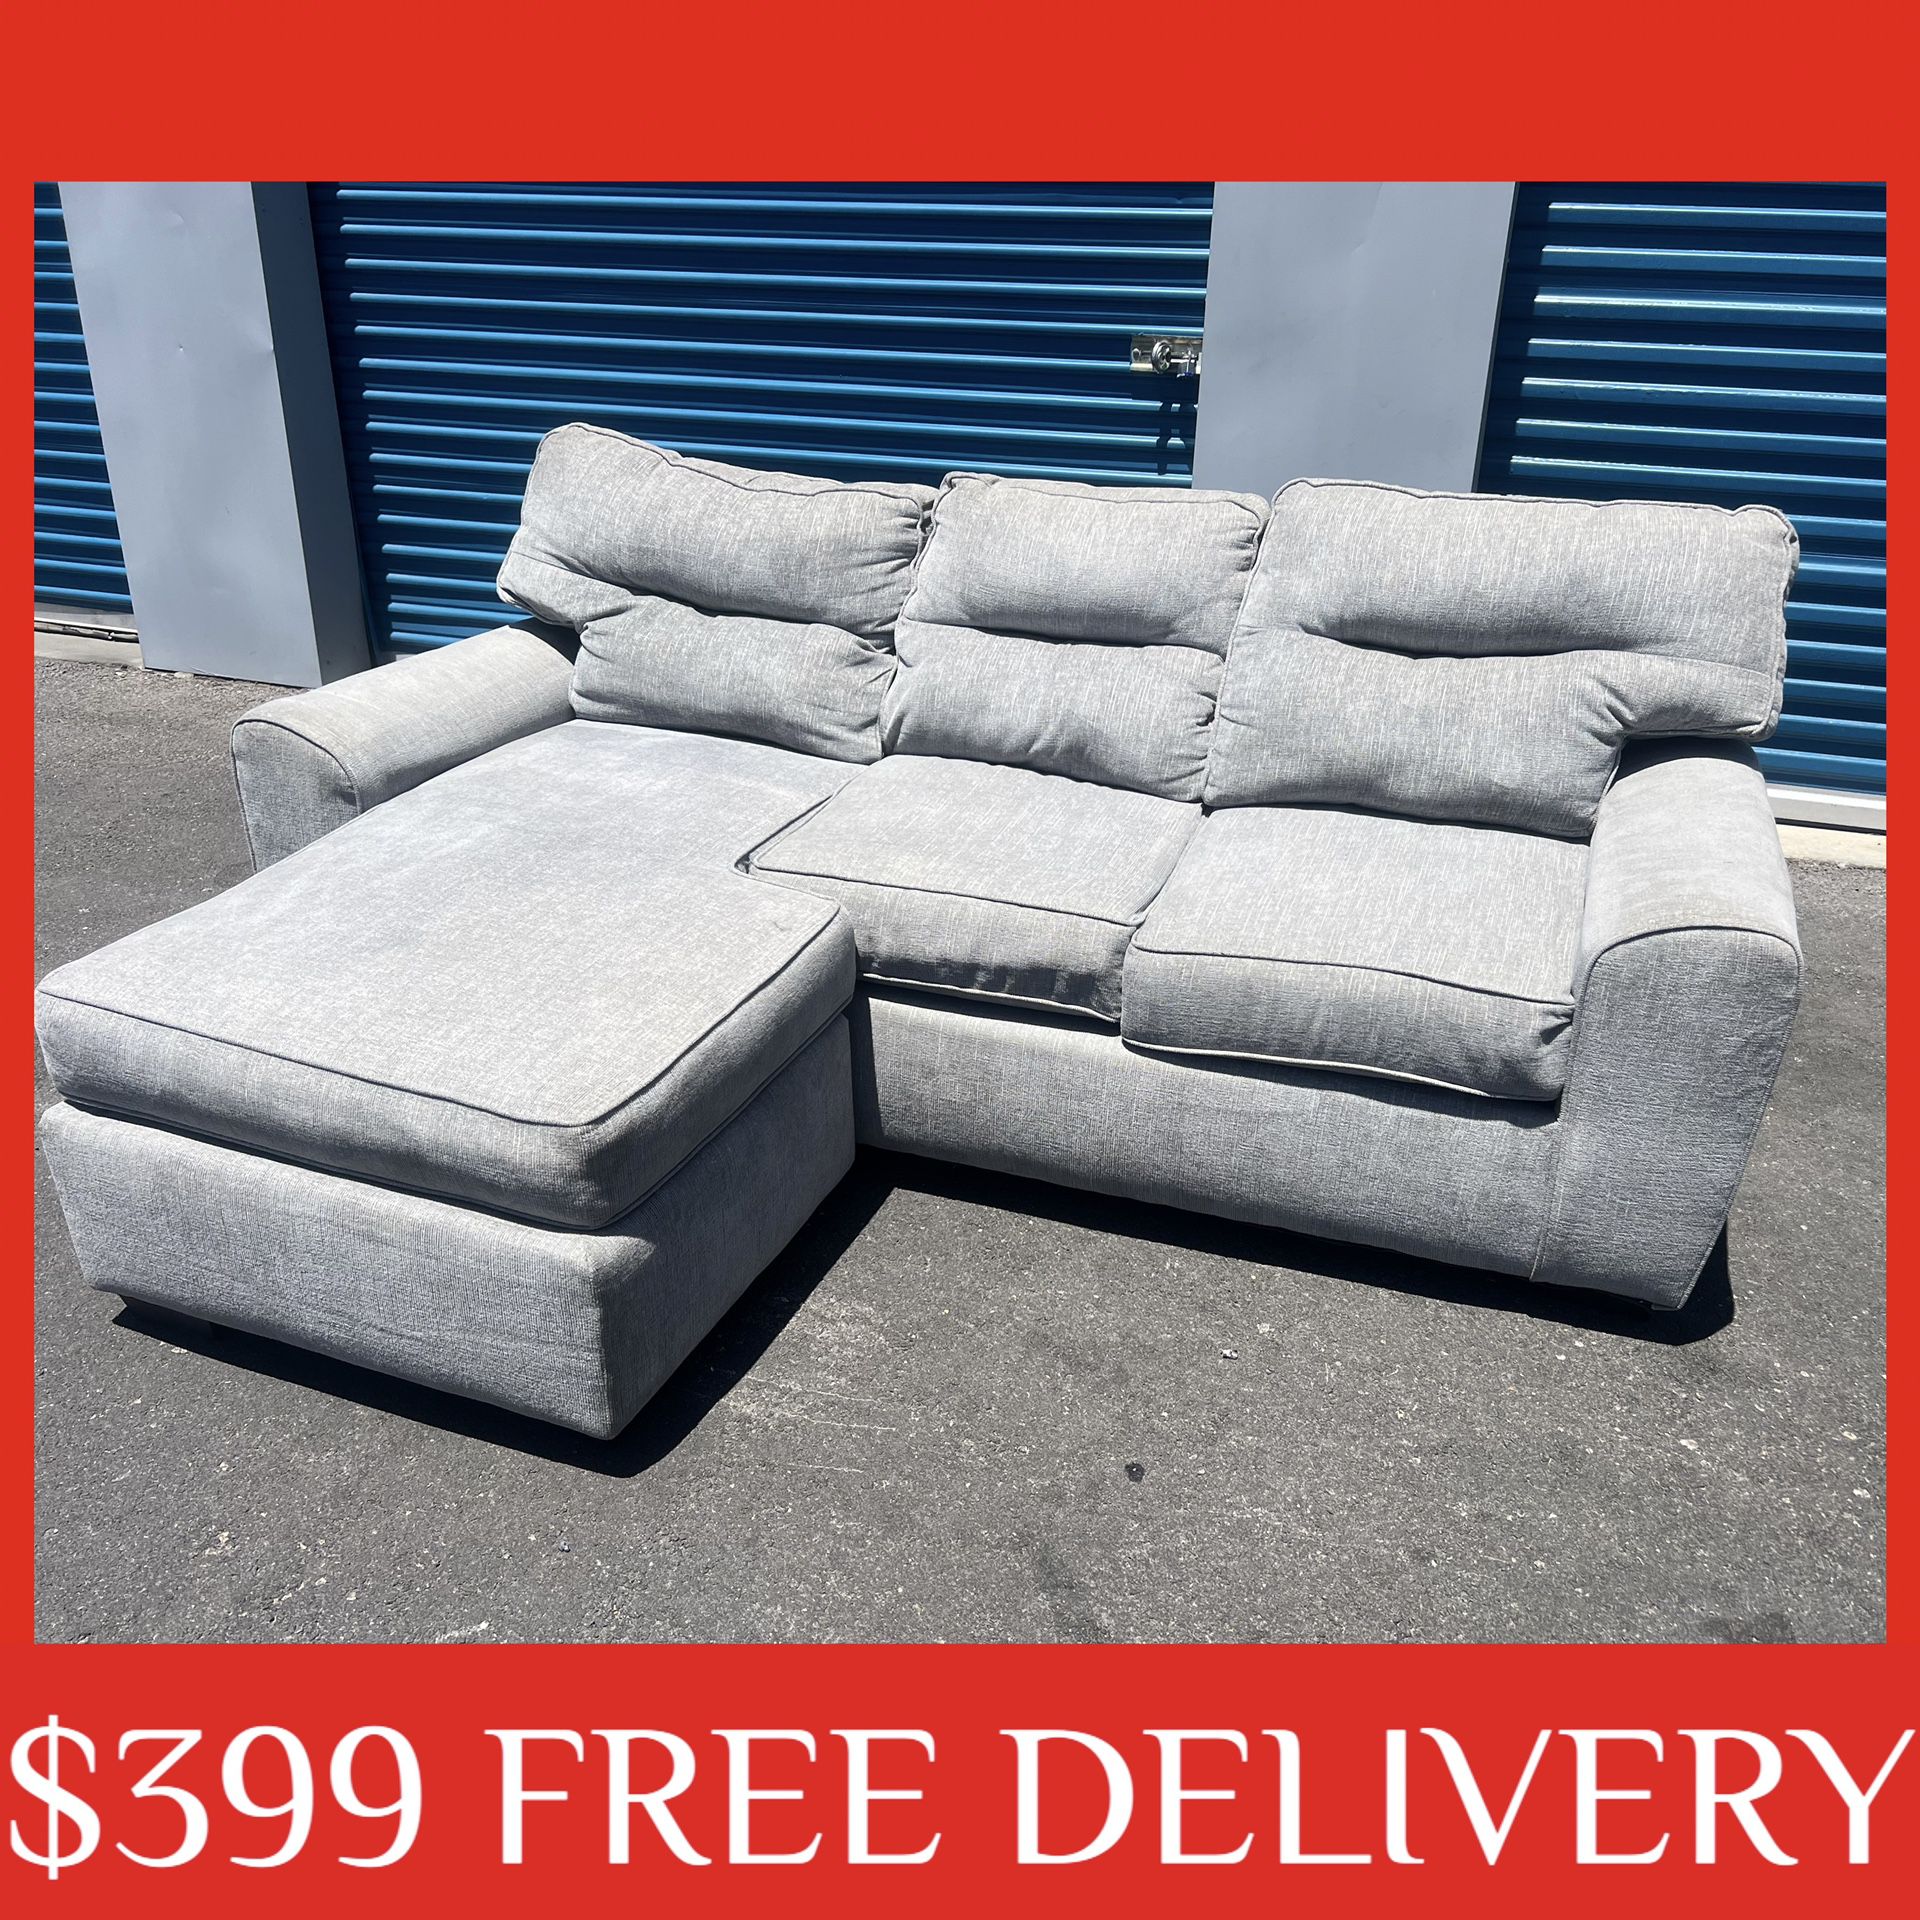 Light Gray REVERSIBLE Chaise MEDIUM SIZE sectional couch sofa recliner (FREE CURBSIDE DELIVERY)